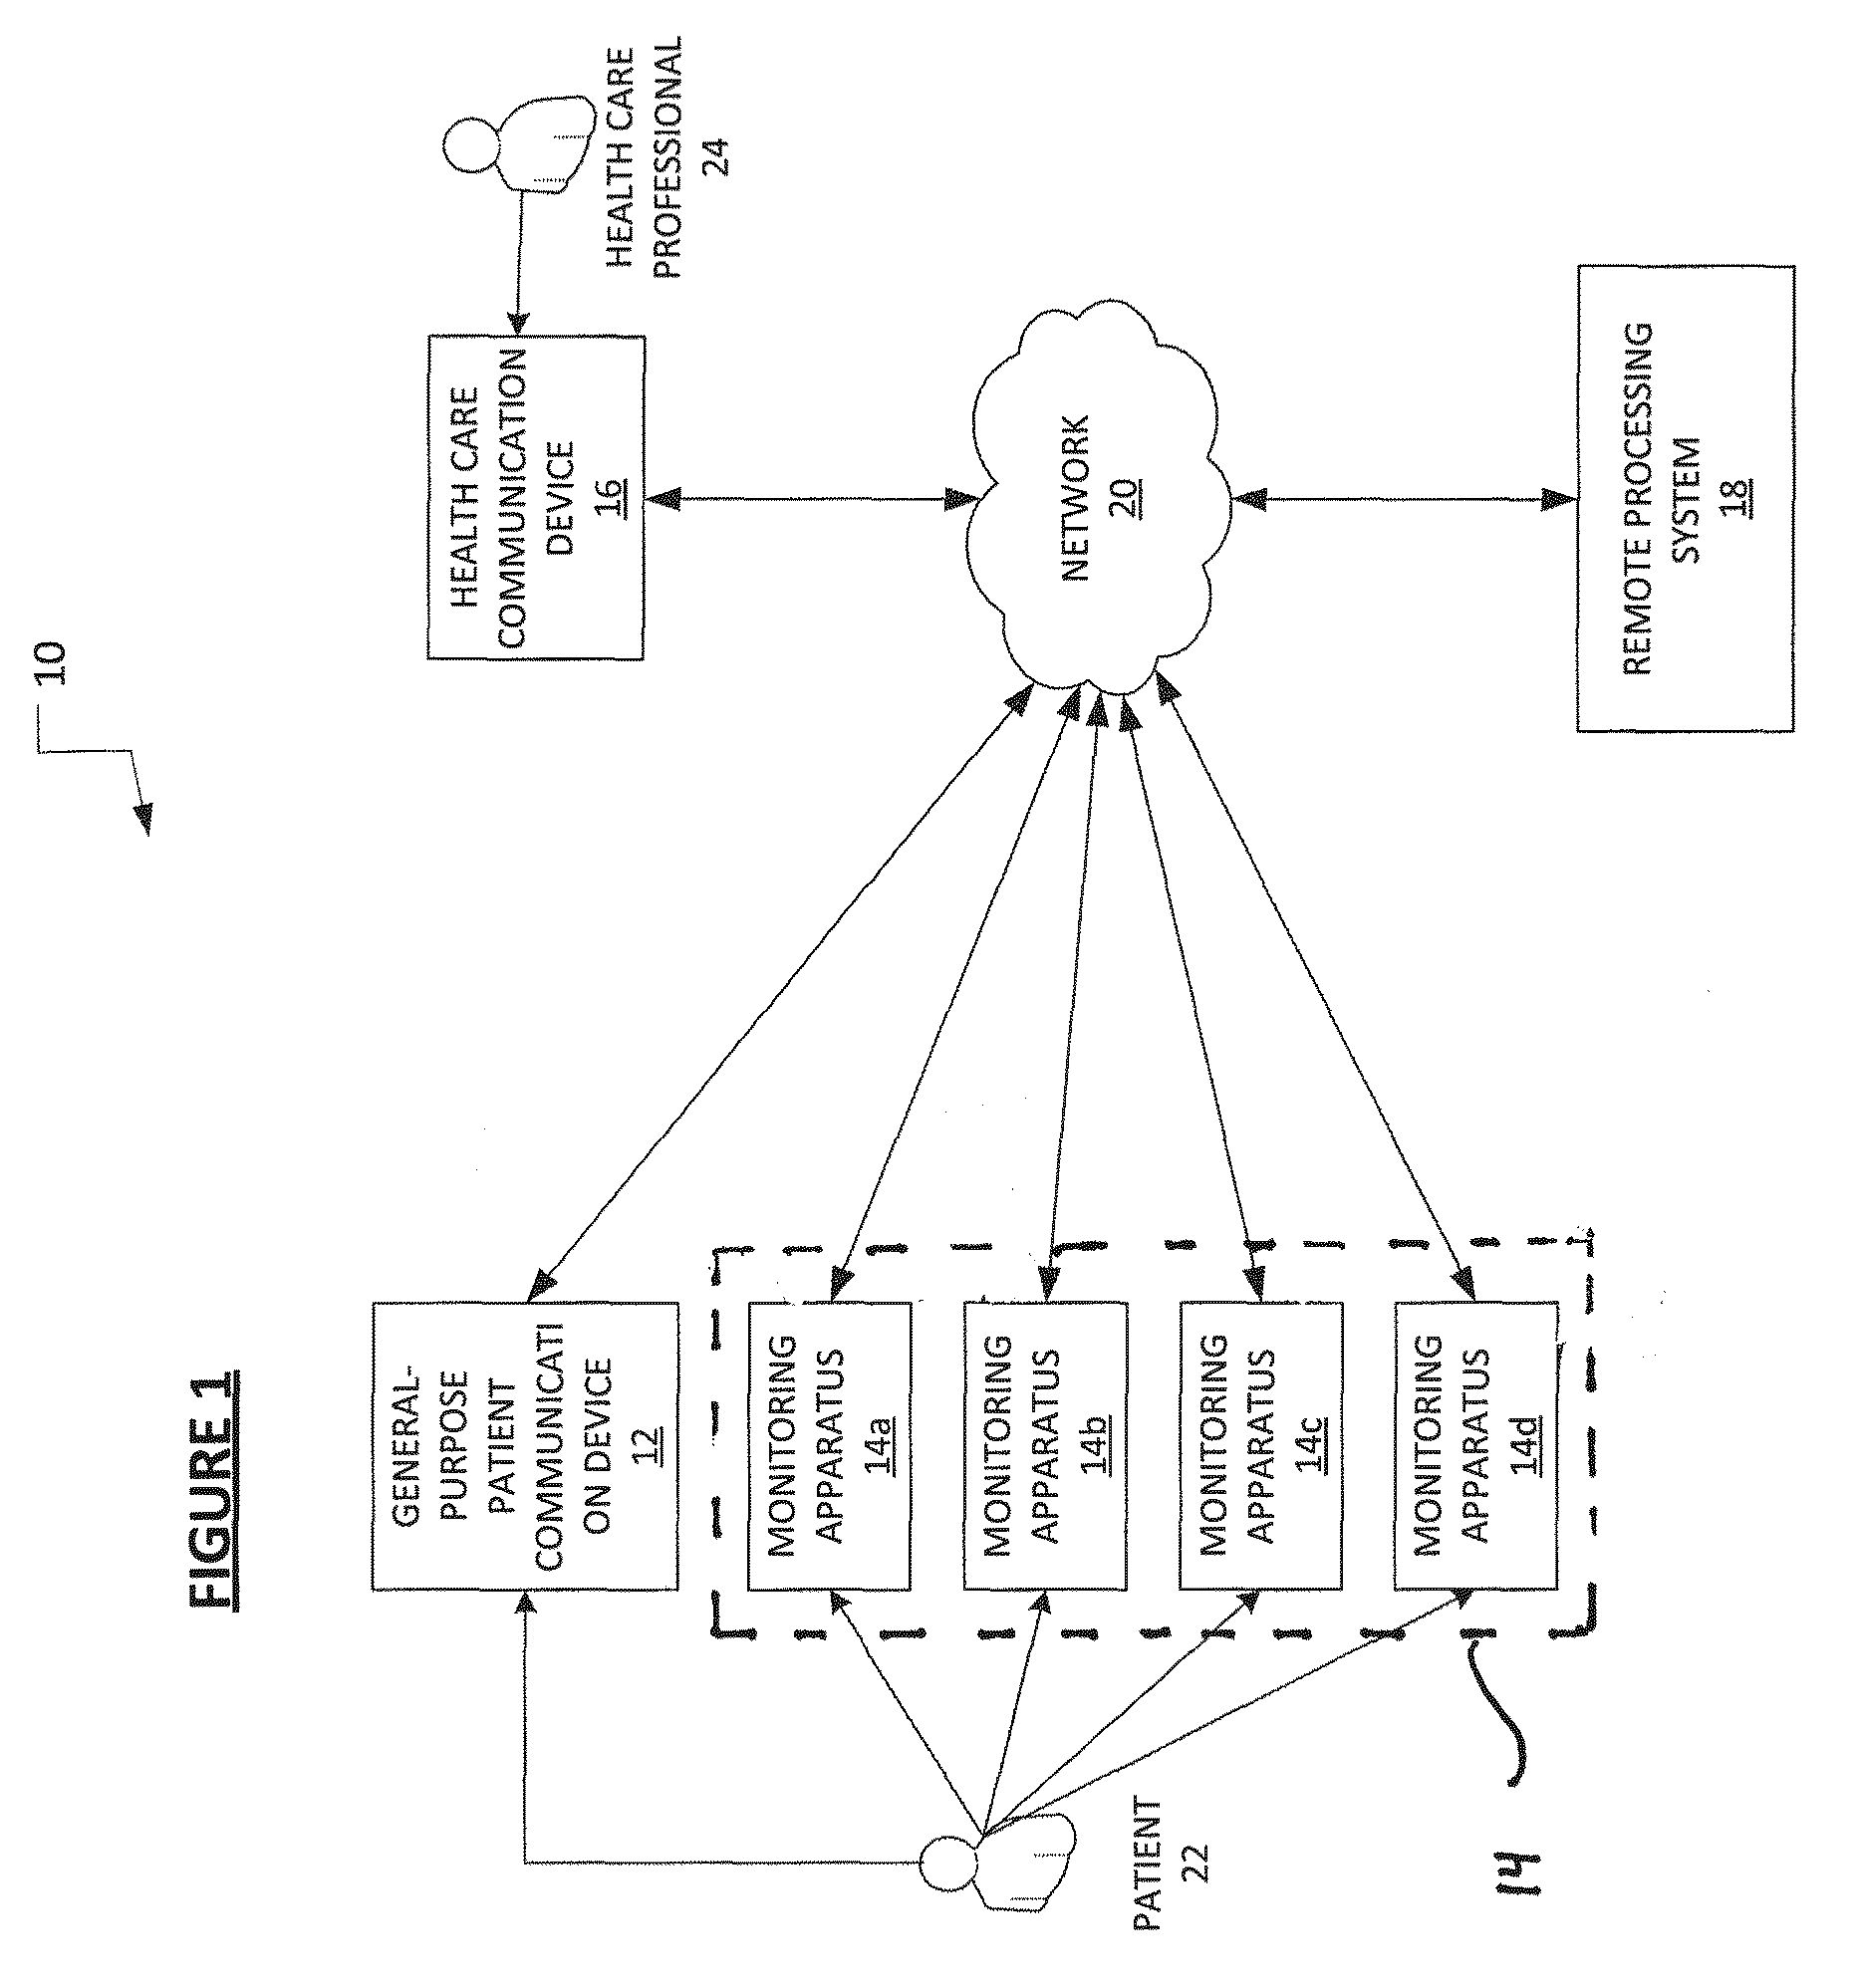 Health-monitoring system with multiple health monitoring devices, interactive voice recognition, and mobile interfaces for data collection and transmission